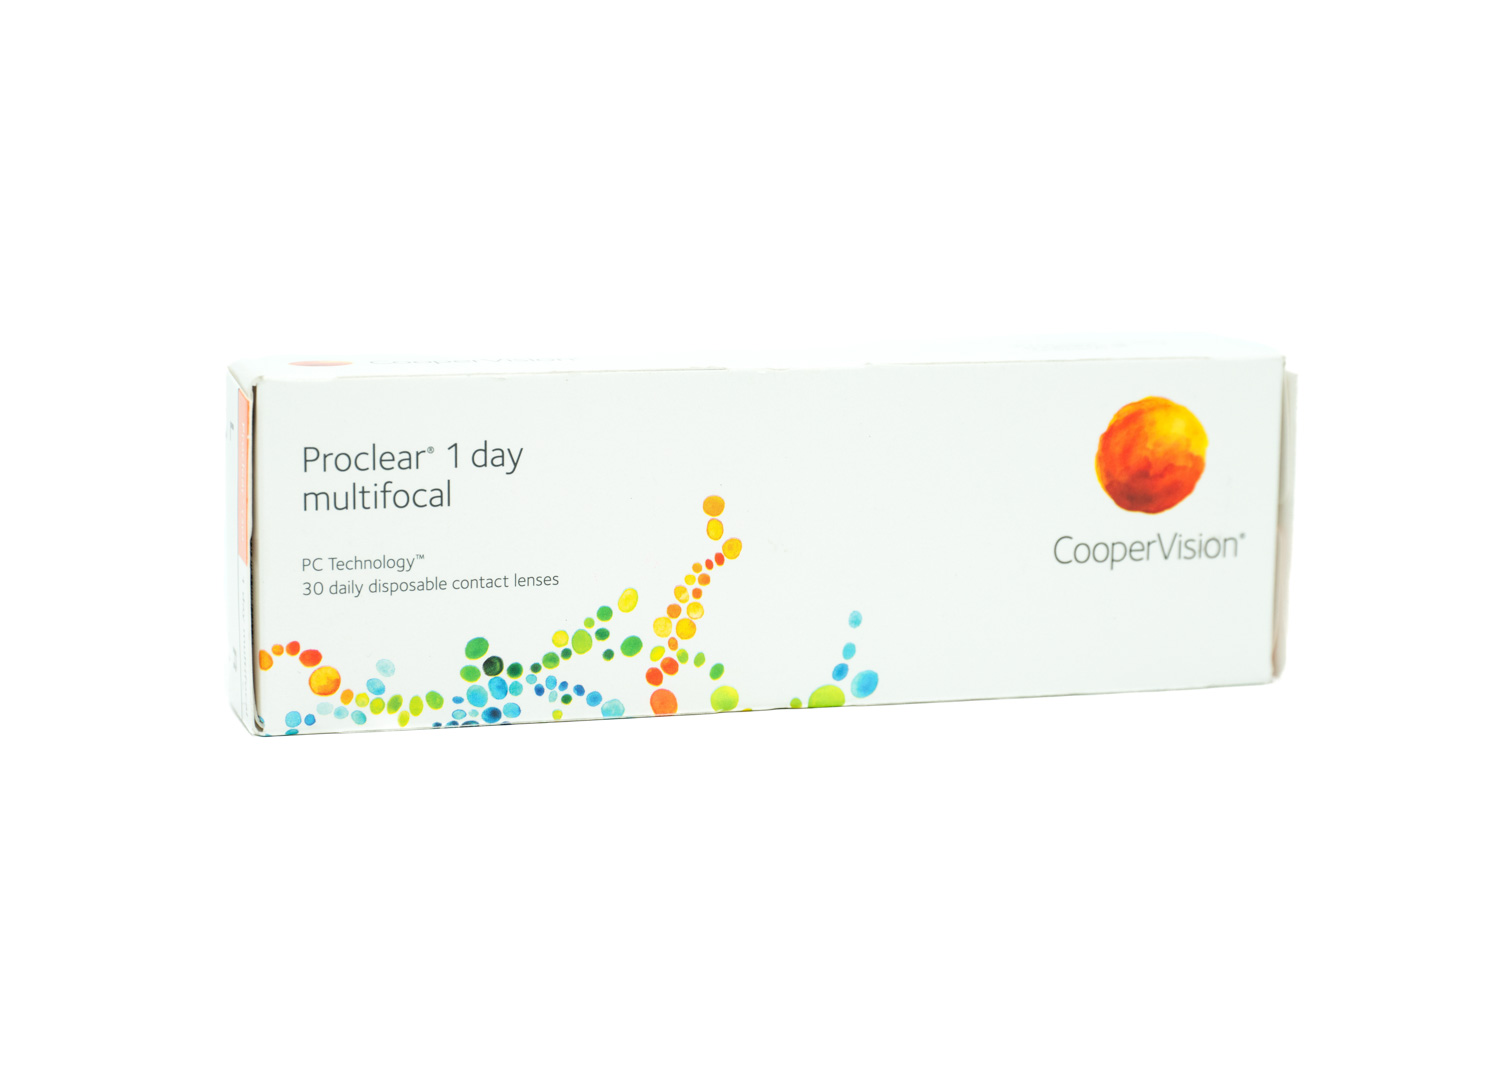 Proclear 1 DAY MULTIFOCAL